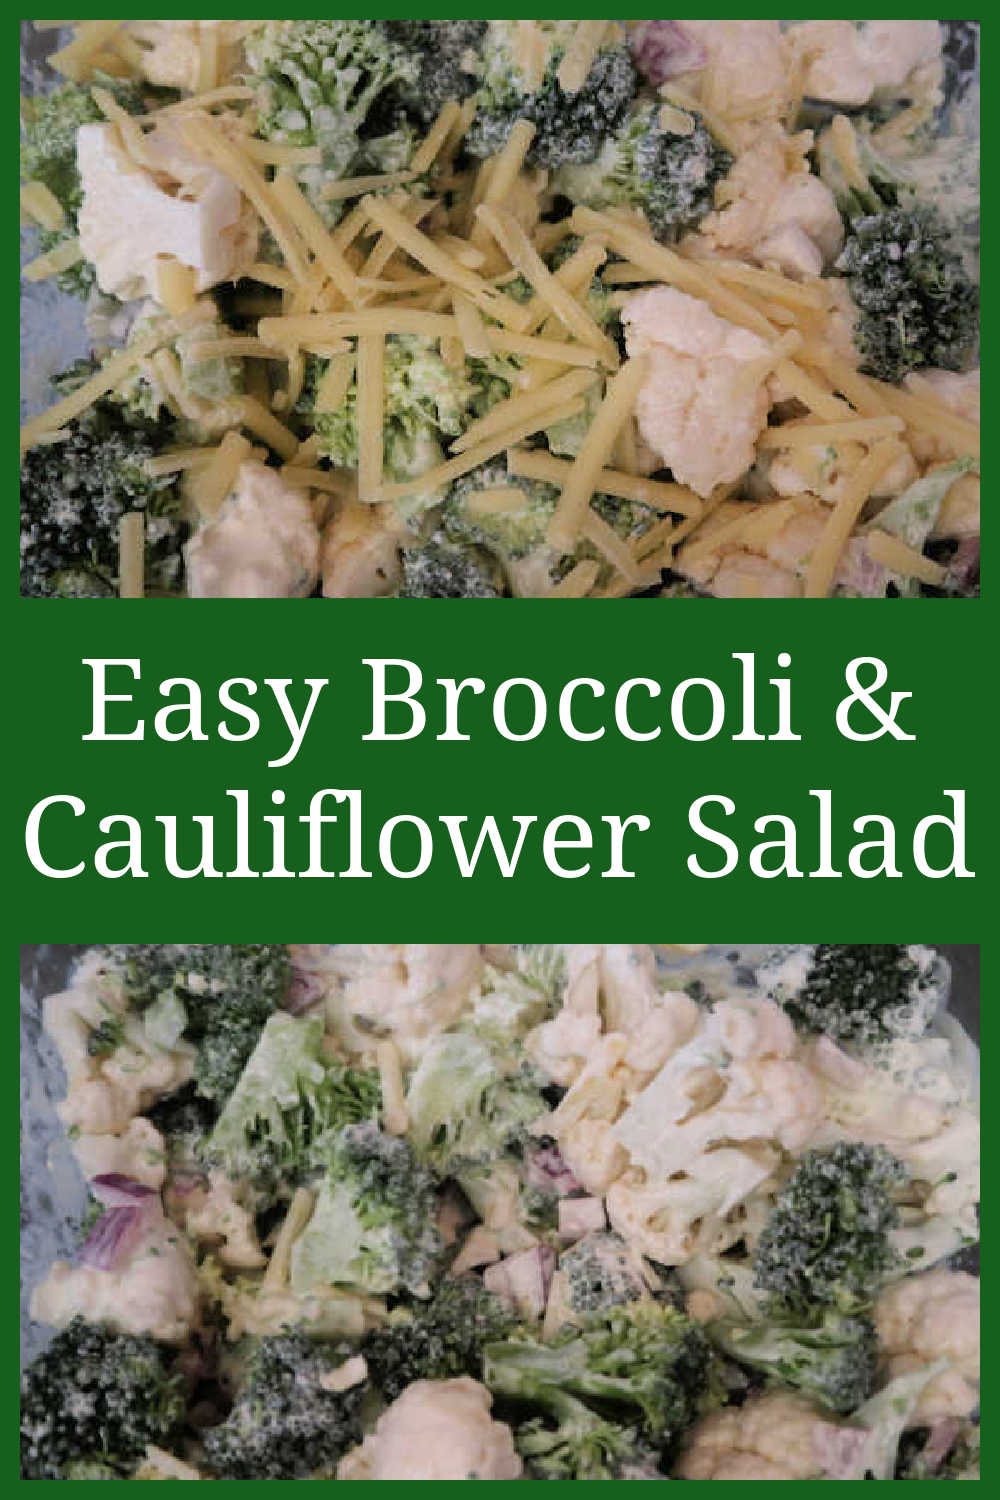 Broccoli Cauliflower Salad Recipe - How to make the best easy salad with a homemade creamy dressing - with the video tutorial.